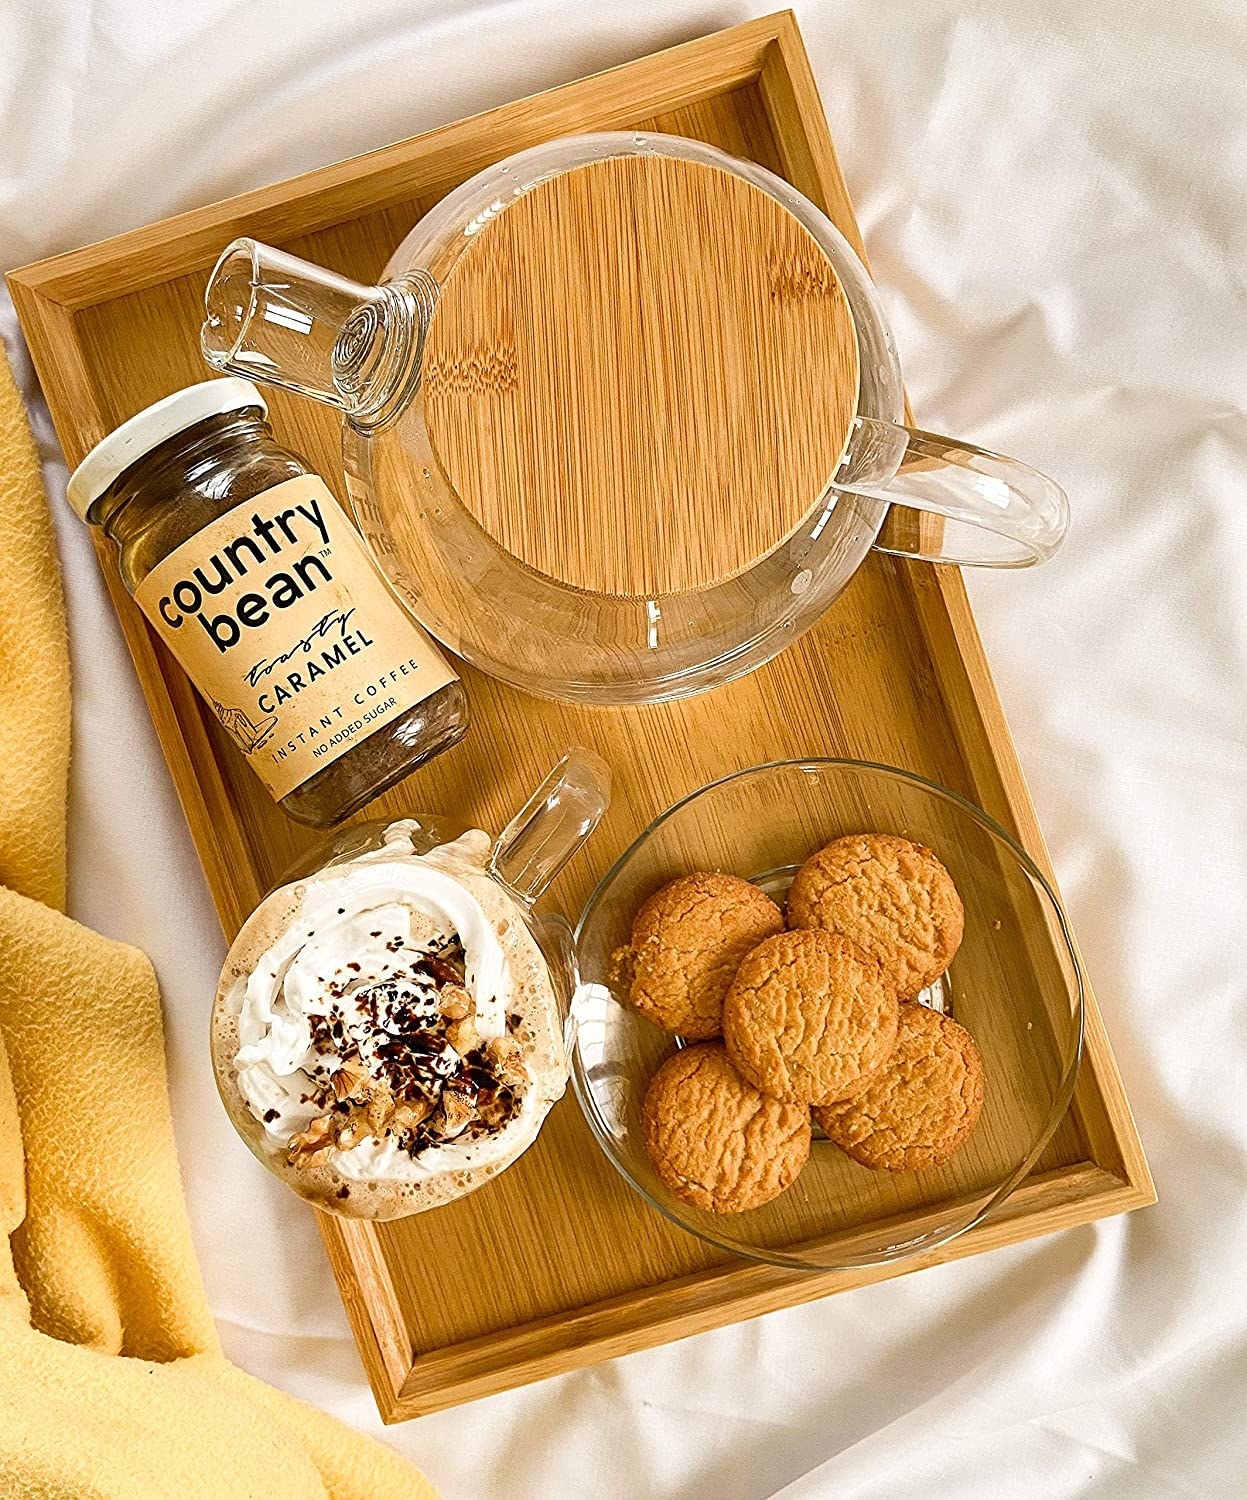 The coffee jar pictured with a cup of brewed coffee, a plate of biscuits, and a glass kettle. All of this is placed on a wooden tray.